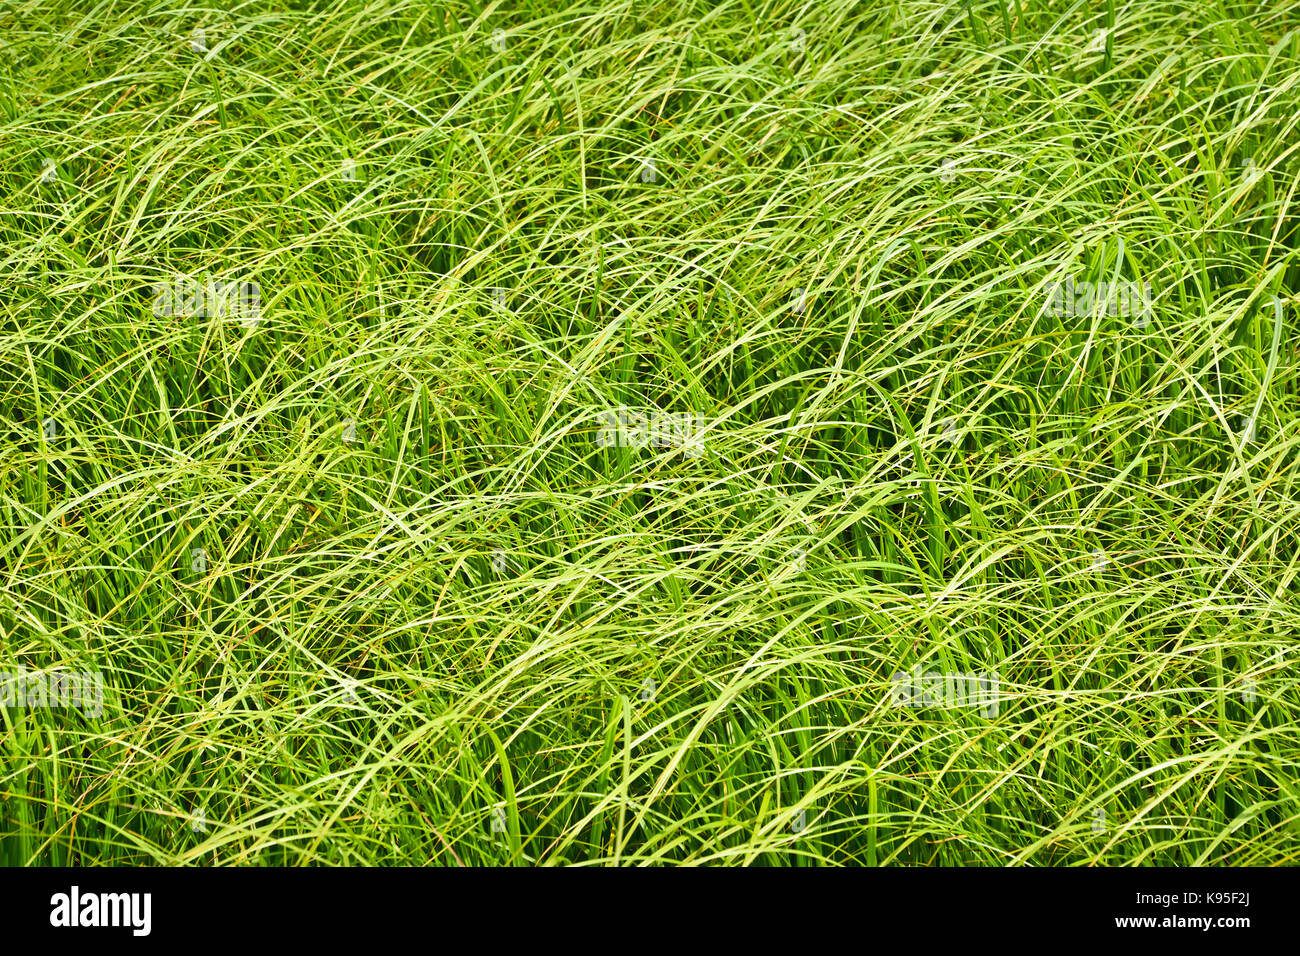 High matted grass on the swampy meadow Fresh summer tall grass on a boggy meadow Stock Photo